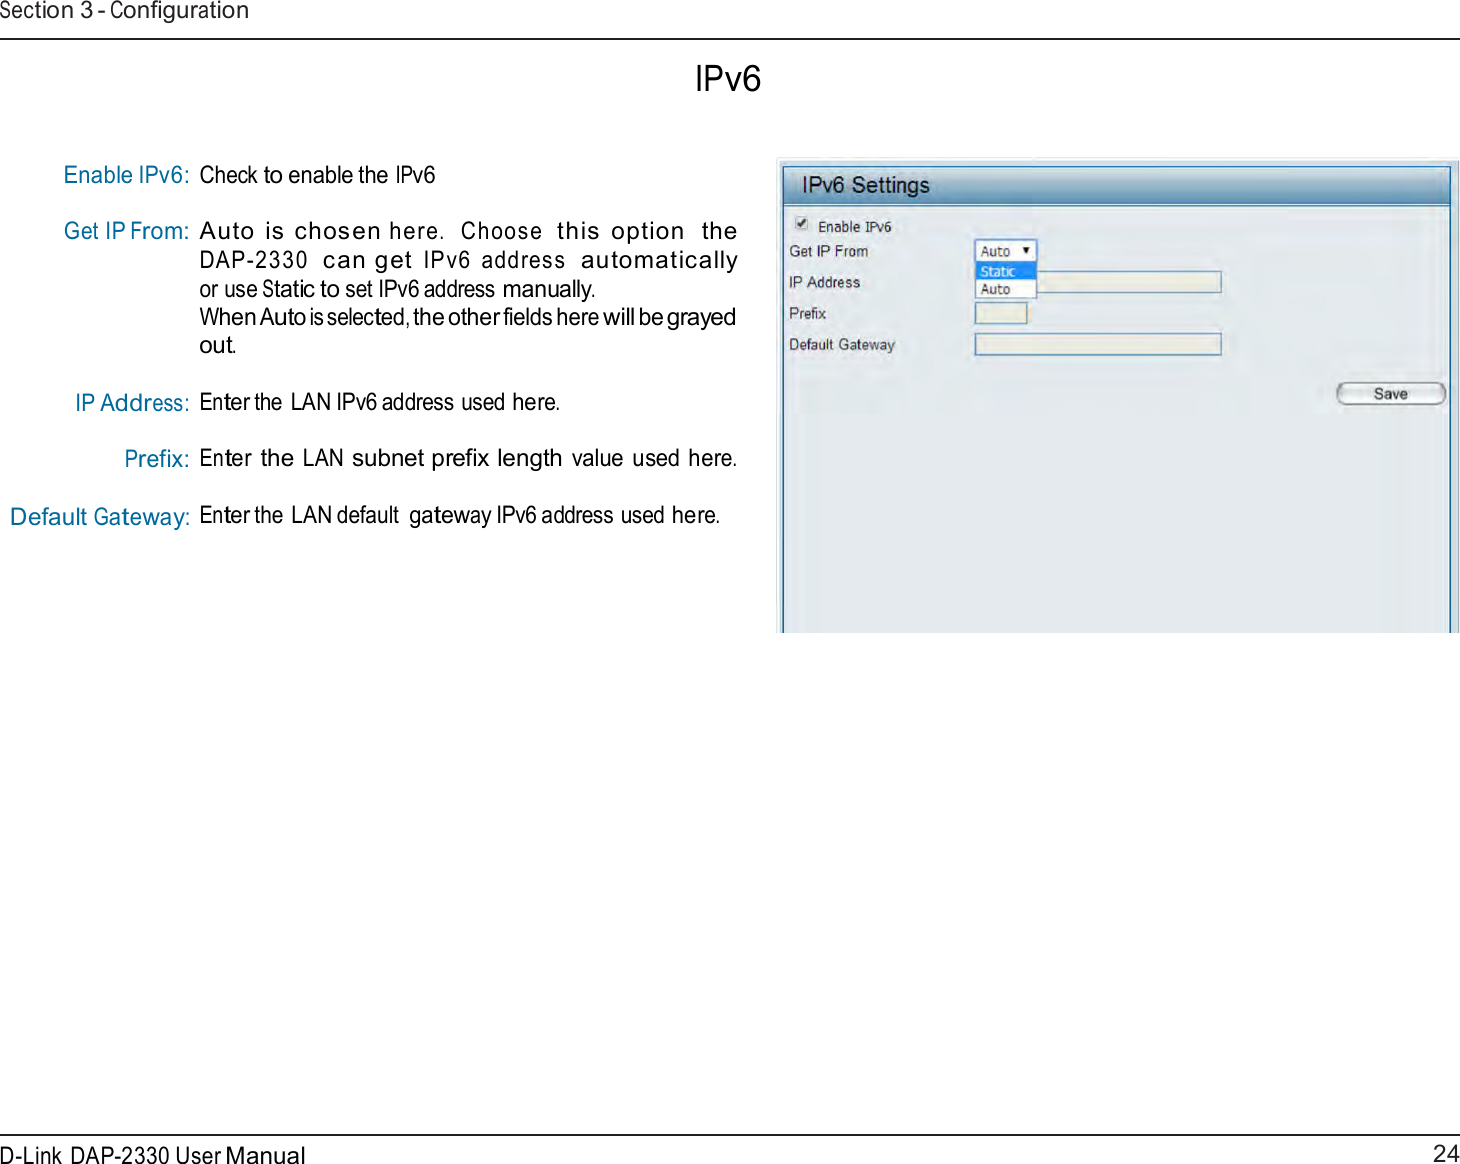 24 D-Link DAP-2330 User ManualSection 3 - Configuration    IPv6    Enable IPv6: Get IP From:       IP Address: Prefix: Default Gateway: Check to enable the IPv6  Auto  is  chosen here.  Choose  this  option  the DAP-2330  can get IPv6  address  automatically or use Static to set IPv6 address manually. When Auto is selected, the other fields here will be grayed out.  Enter the LAN IPv6 address used here.  Enter the LAN subnet prefix length value used here. Enter the LAN default gateway IPv6 address used here. 